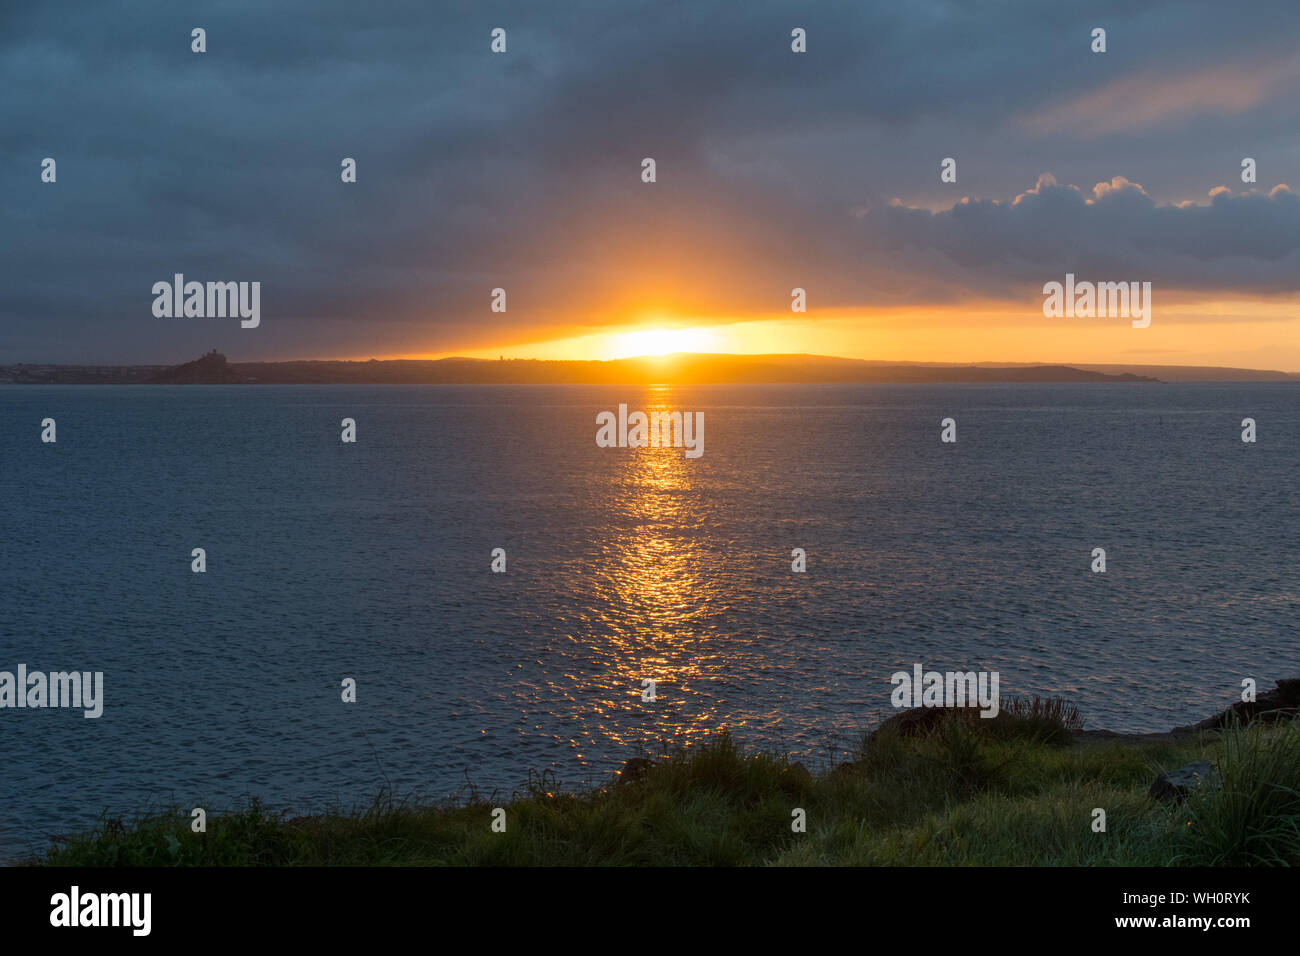 Newlyn, Cornwall, UK. 2nd September 2019. UK Weather. Clouds moved in at sunrise, bringing light showers, with the sun just managing to break through a gap in the approaching clouds.  Credit Simon Maycock / Alamy Live News. Stock Photo